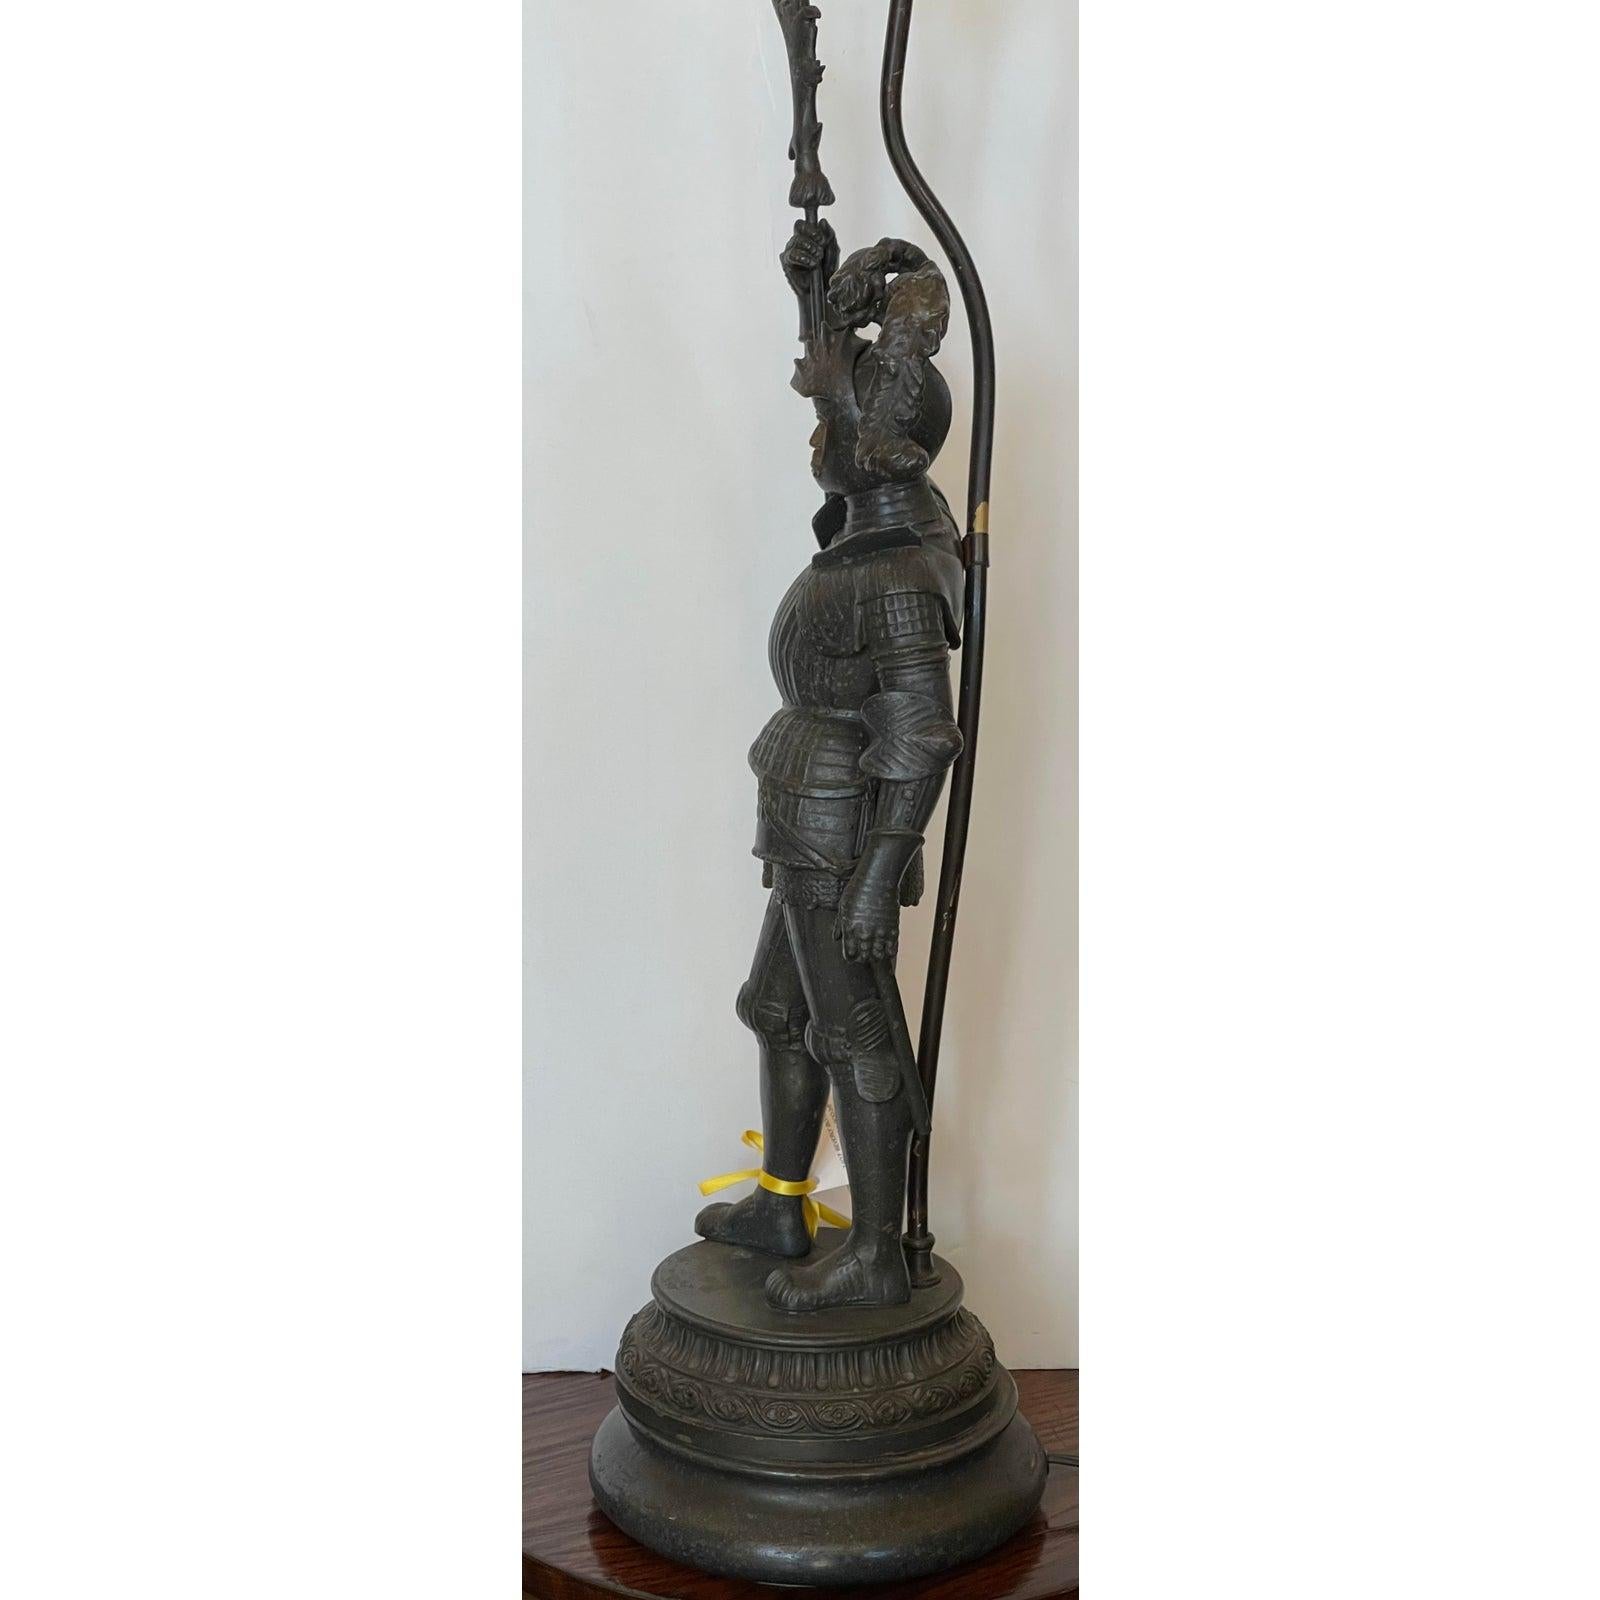 Renaissance Revival Antique Knight in Armor Figural Table Lamp, Early 20th Century